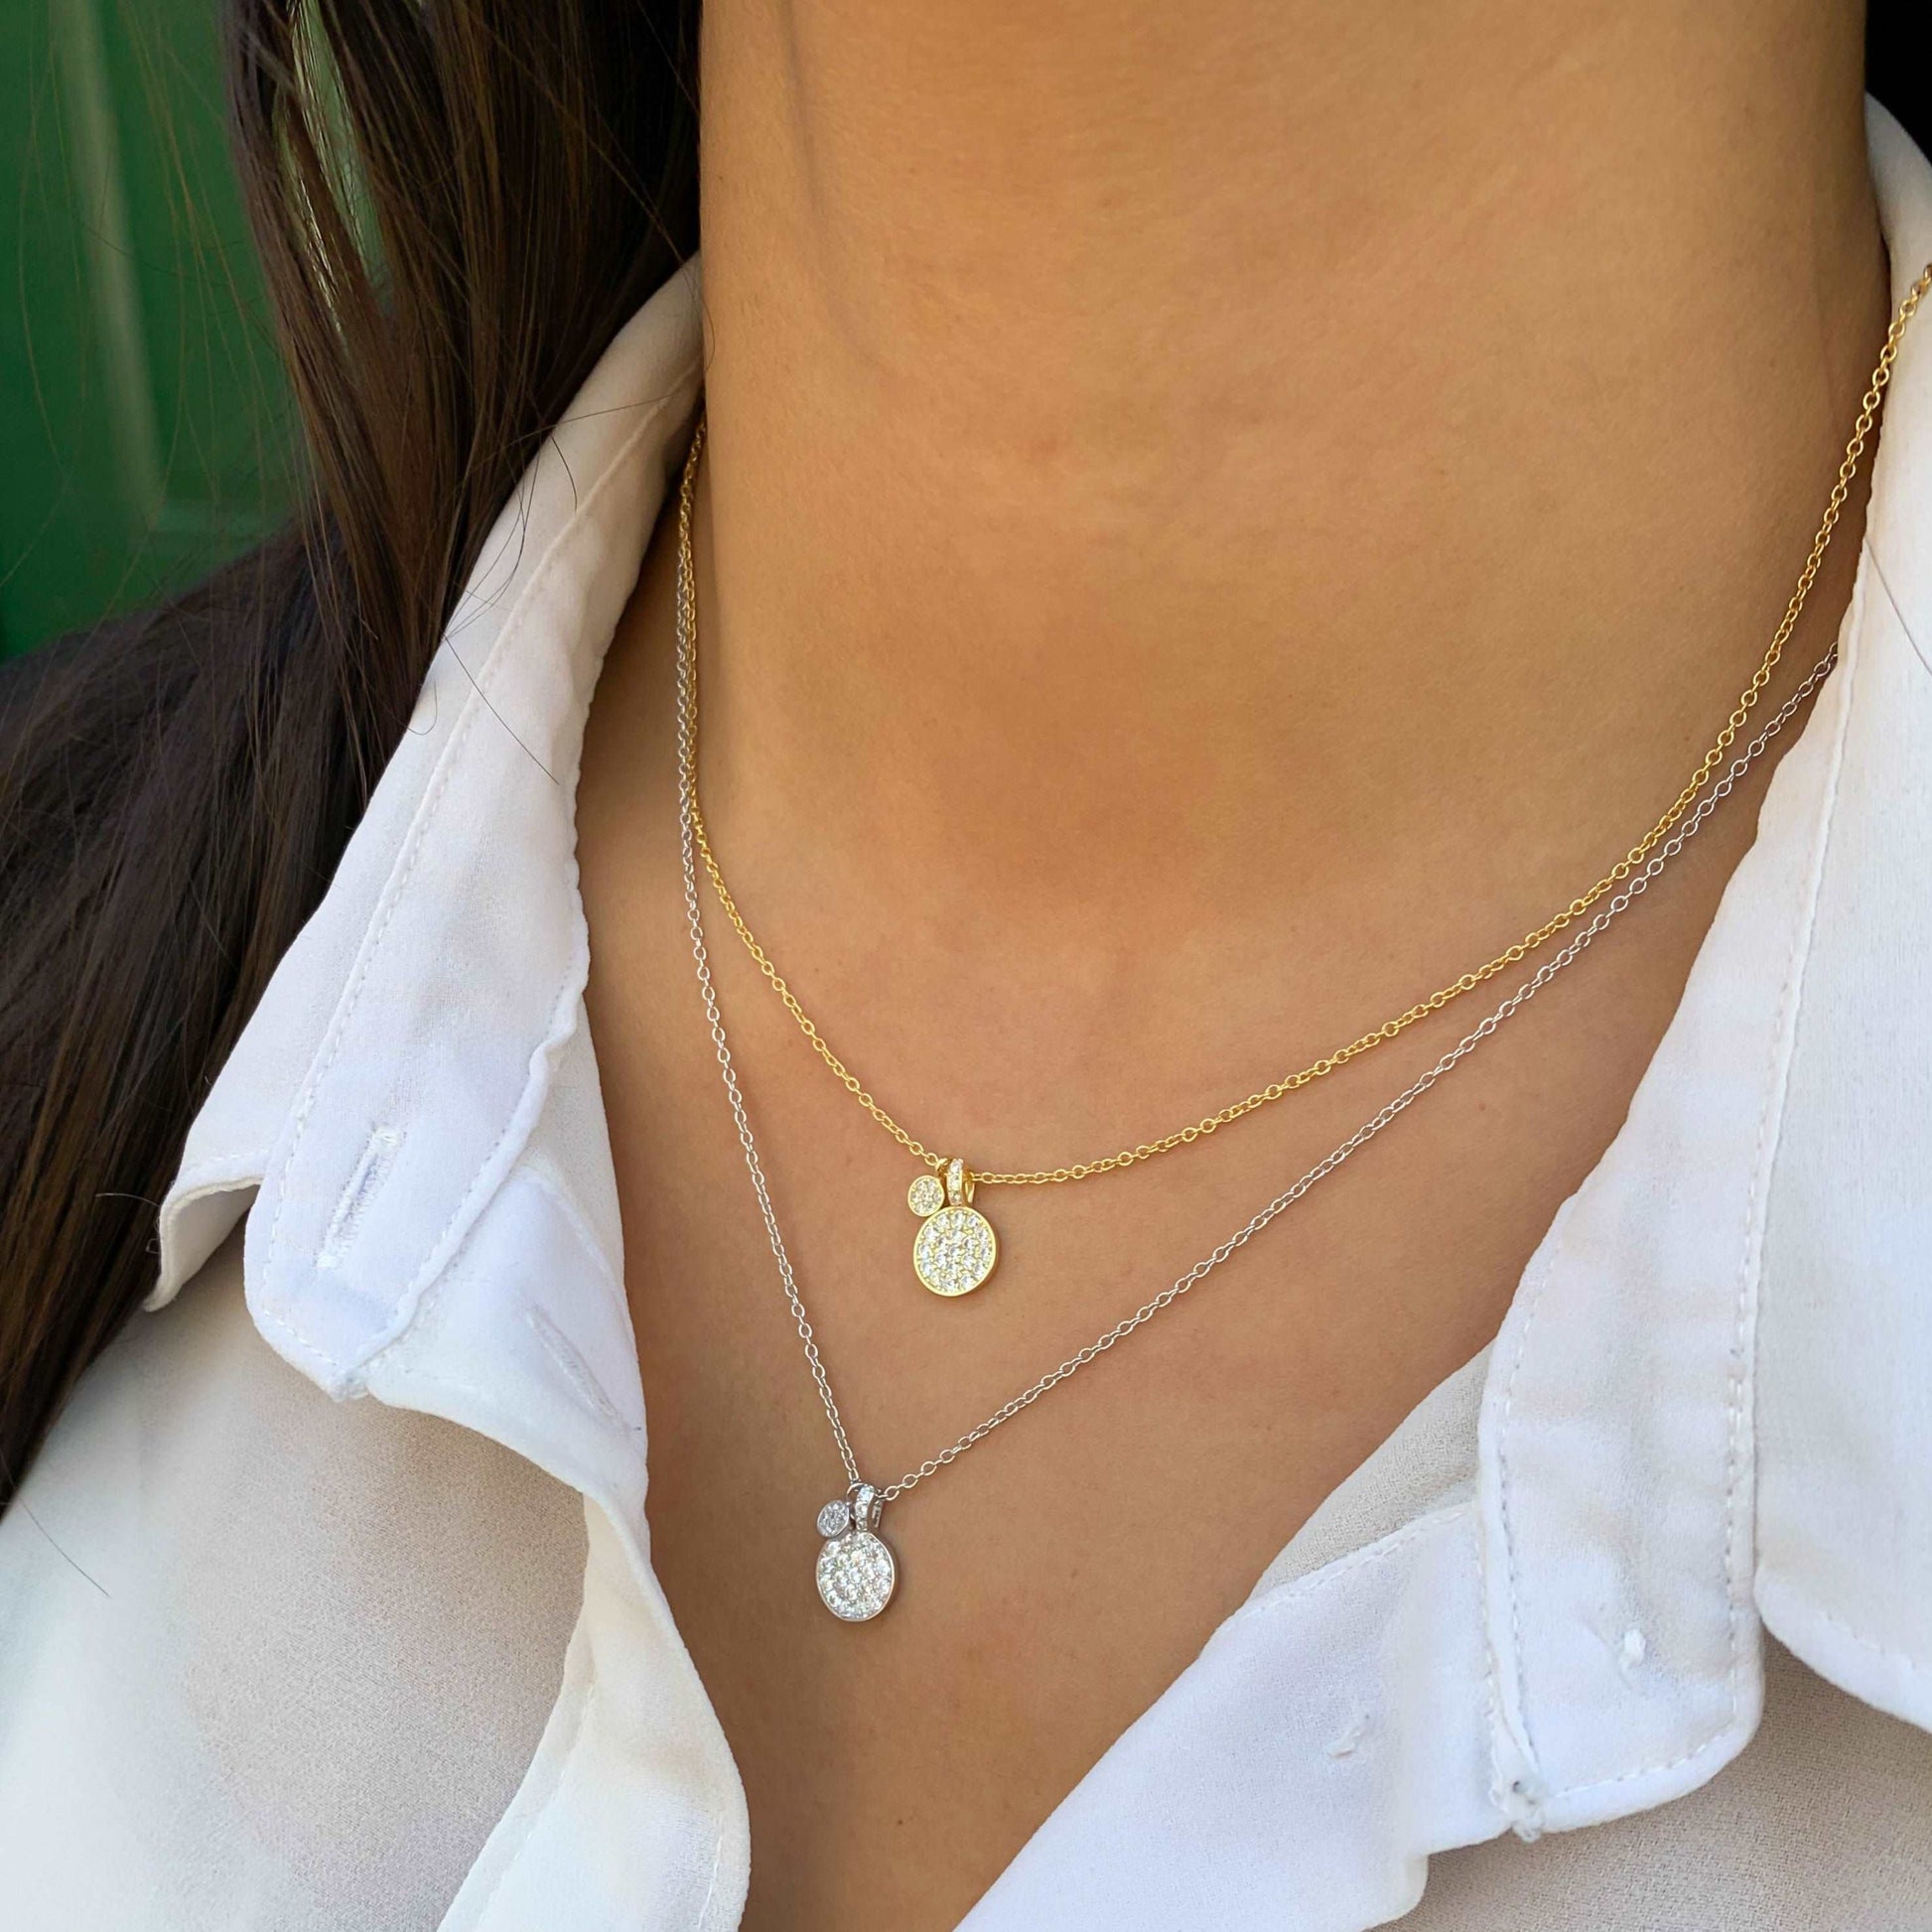 Dainty Disc Charm Necklace